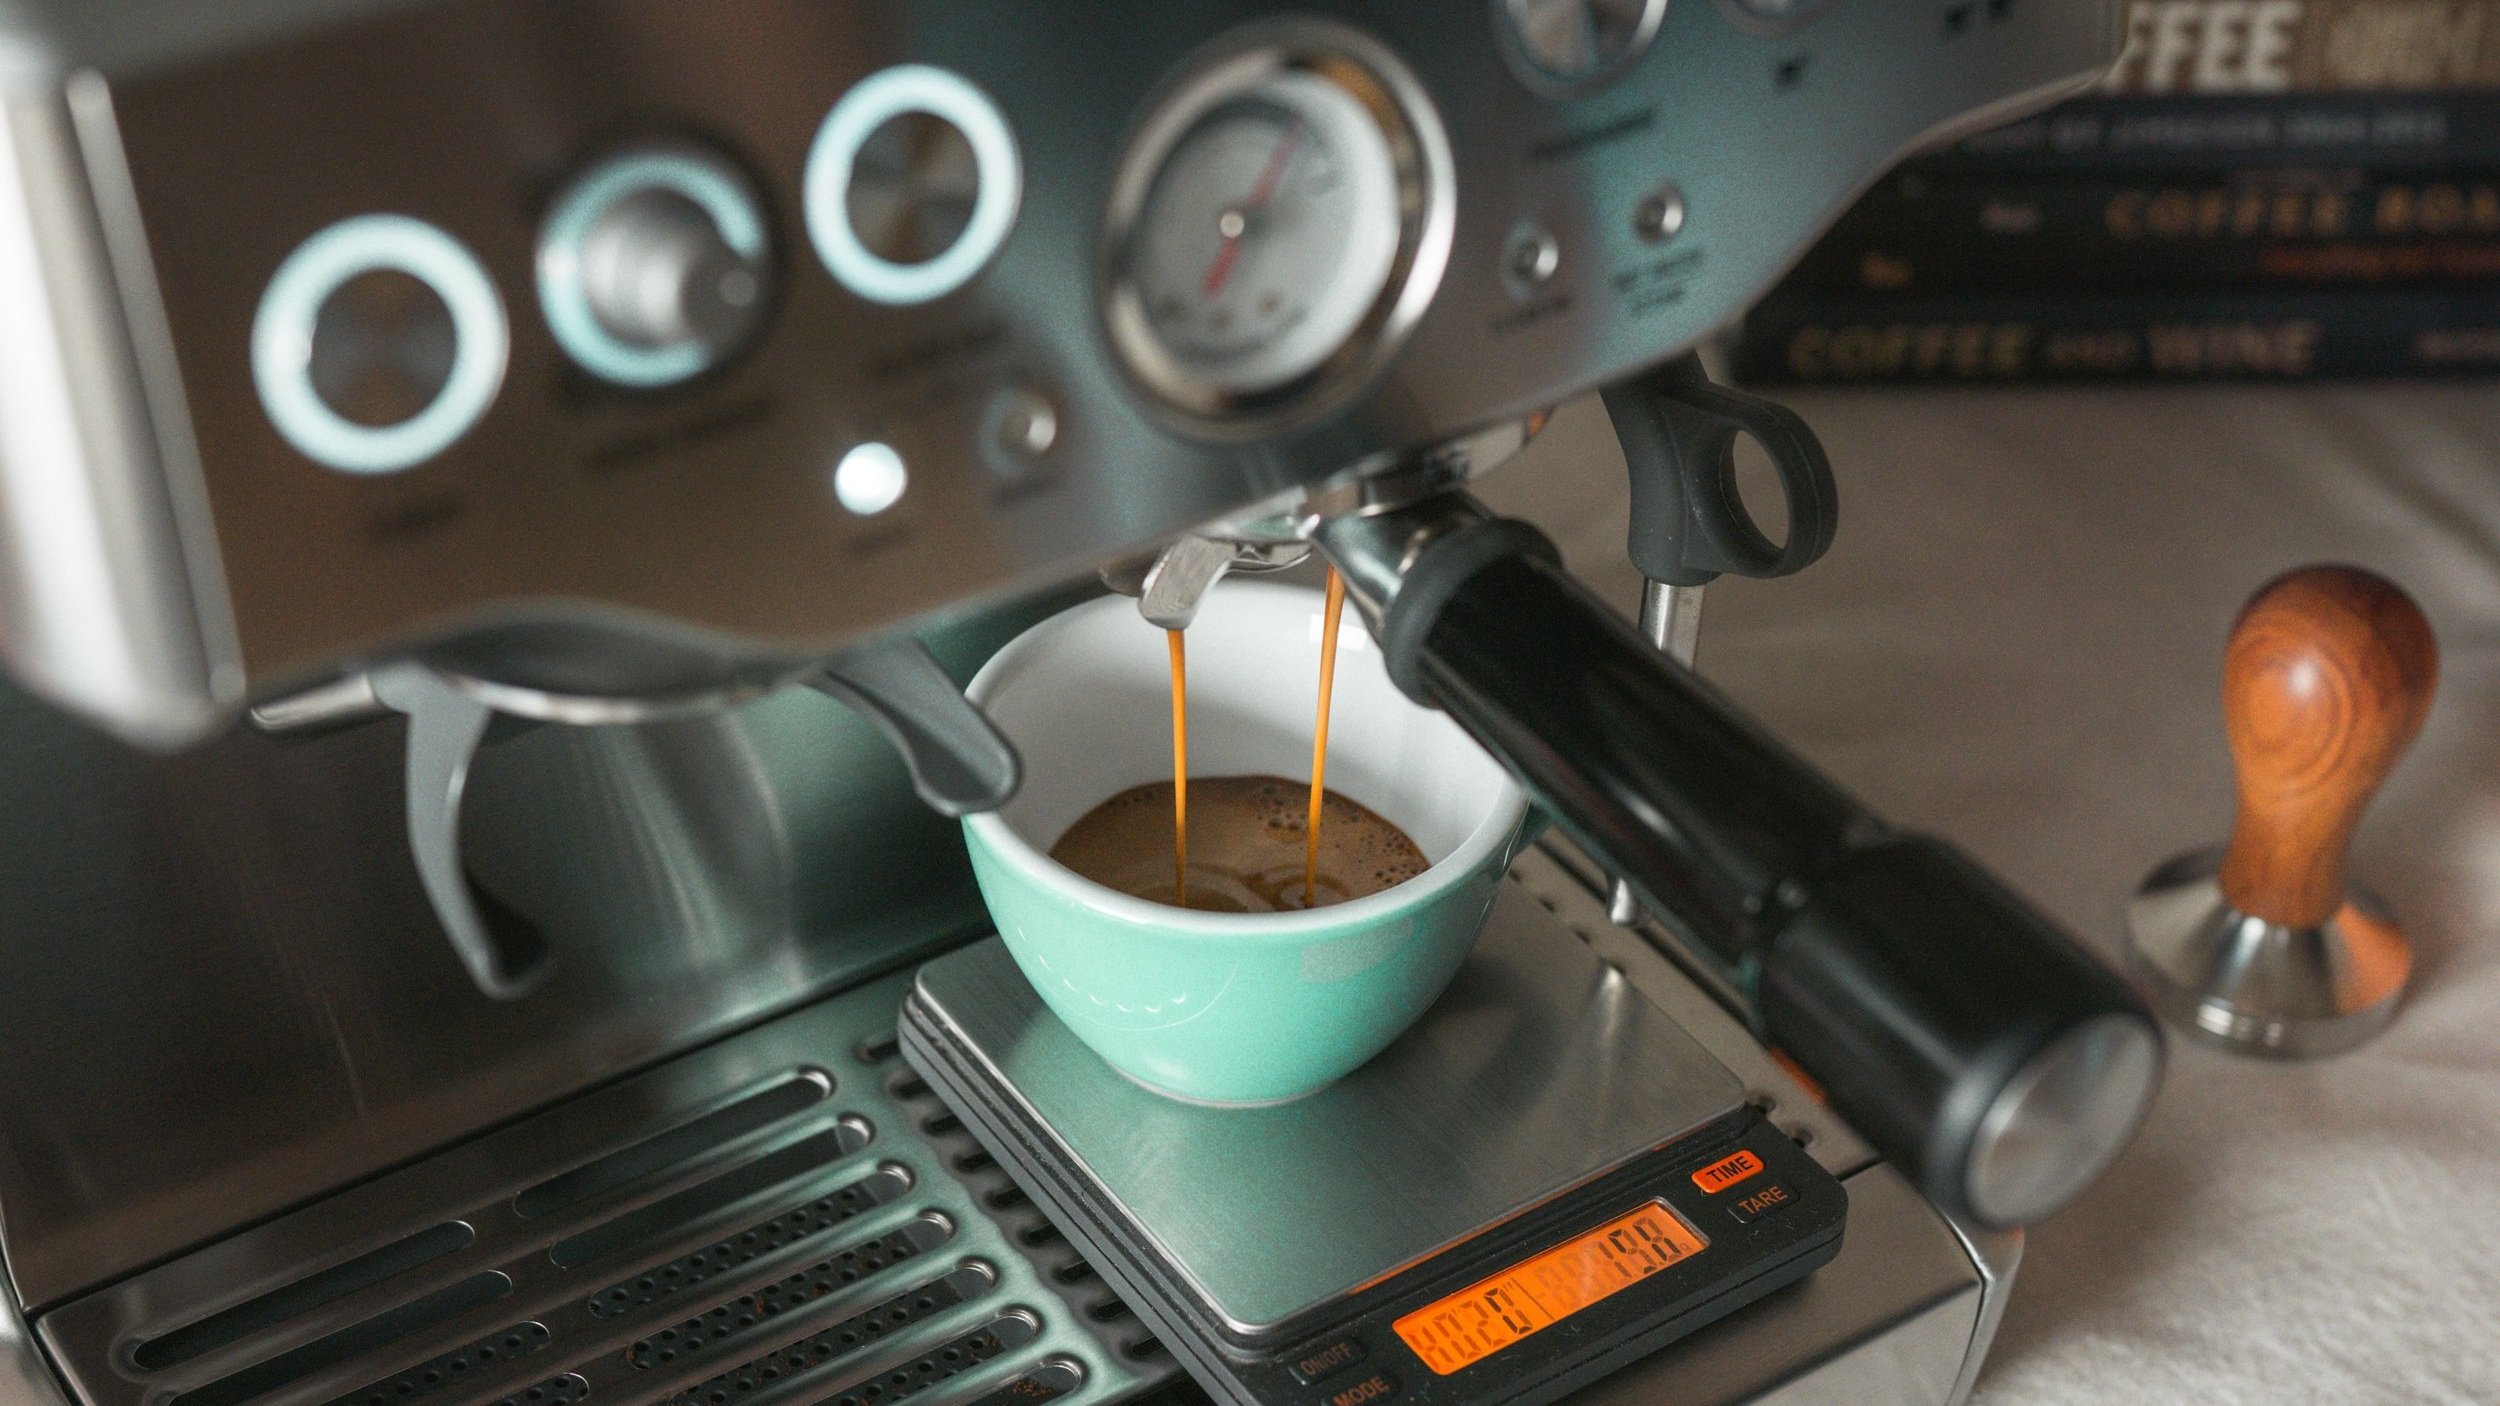 How to get the most out of the Sage/Breville Barista Express